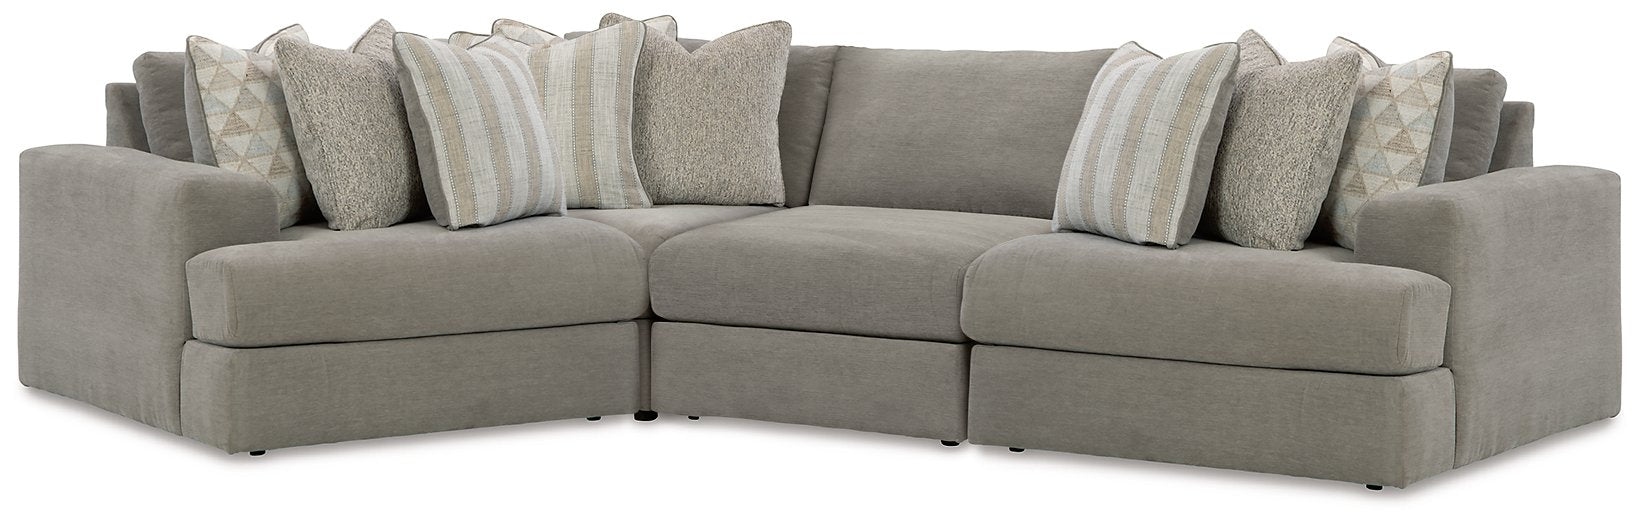 Avaliyah 4-Piece Sectional image